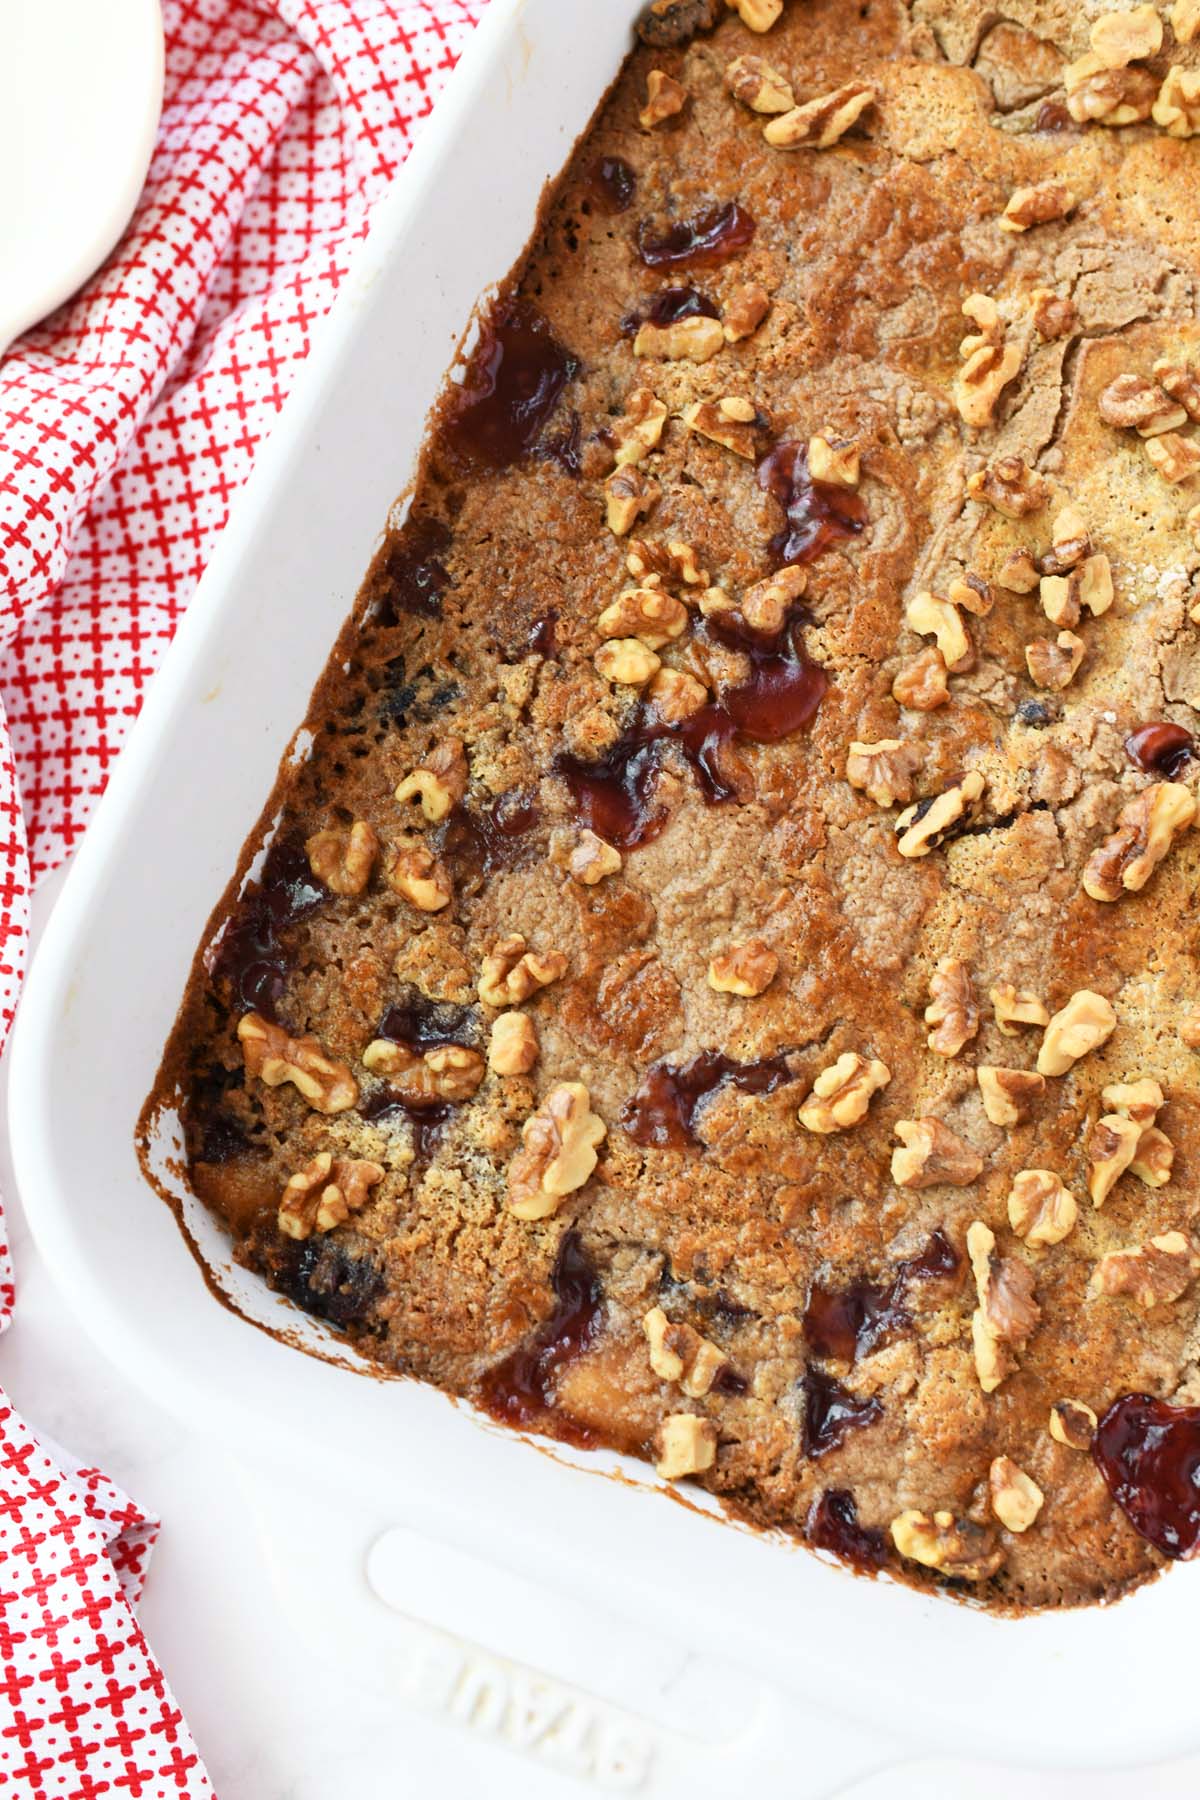 Cranberry Apple Dump cake with walnuts on it in a white pan.